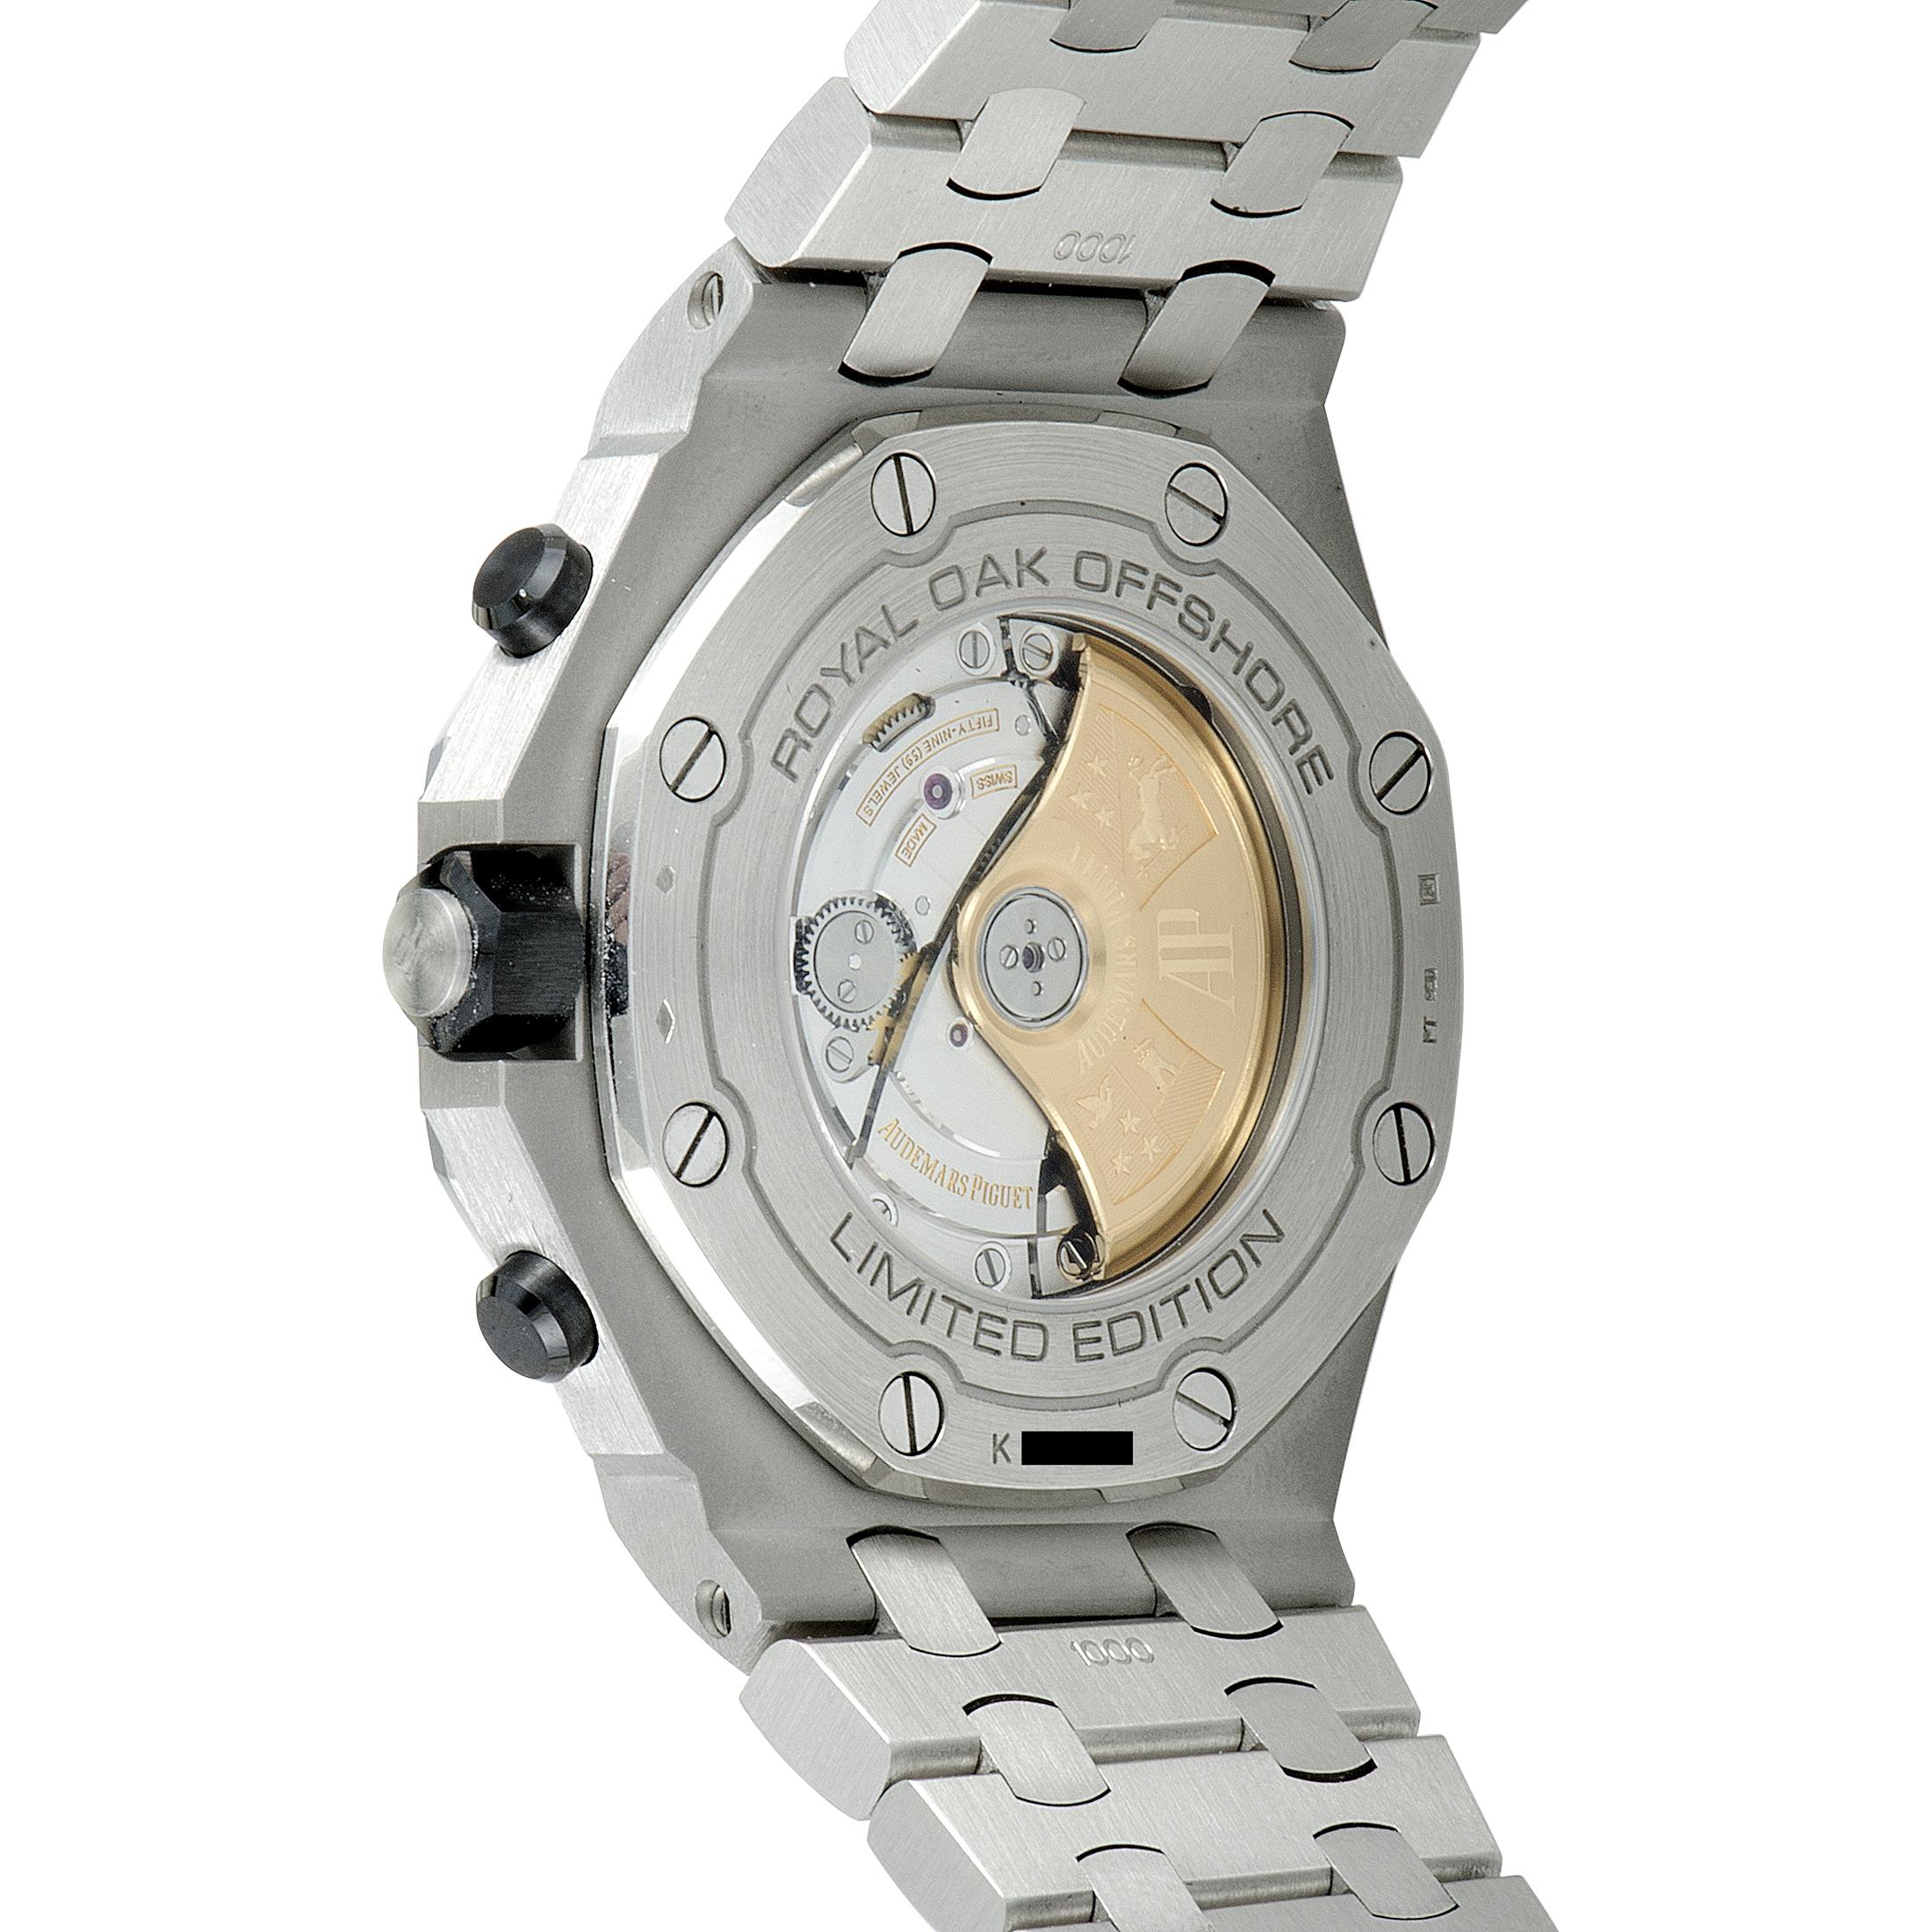 Employing appealing colors and applying exquisite finishes both to the attractive dial and the robust case, Audemars Piguet introduced this remarkable timepiece which boasts the quintessential Royal Oak design in exceptionally masculine and